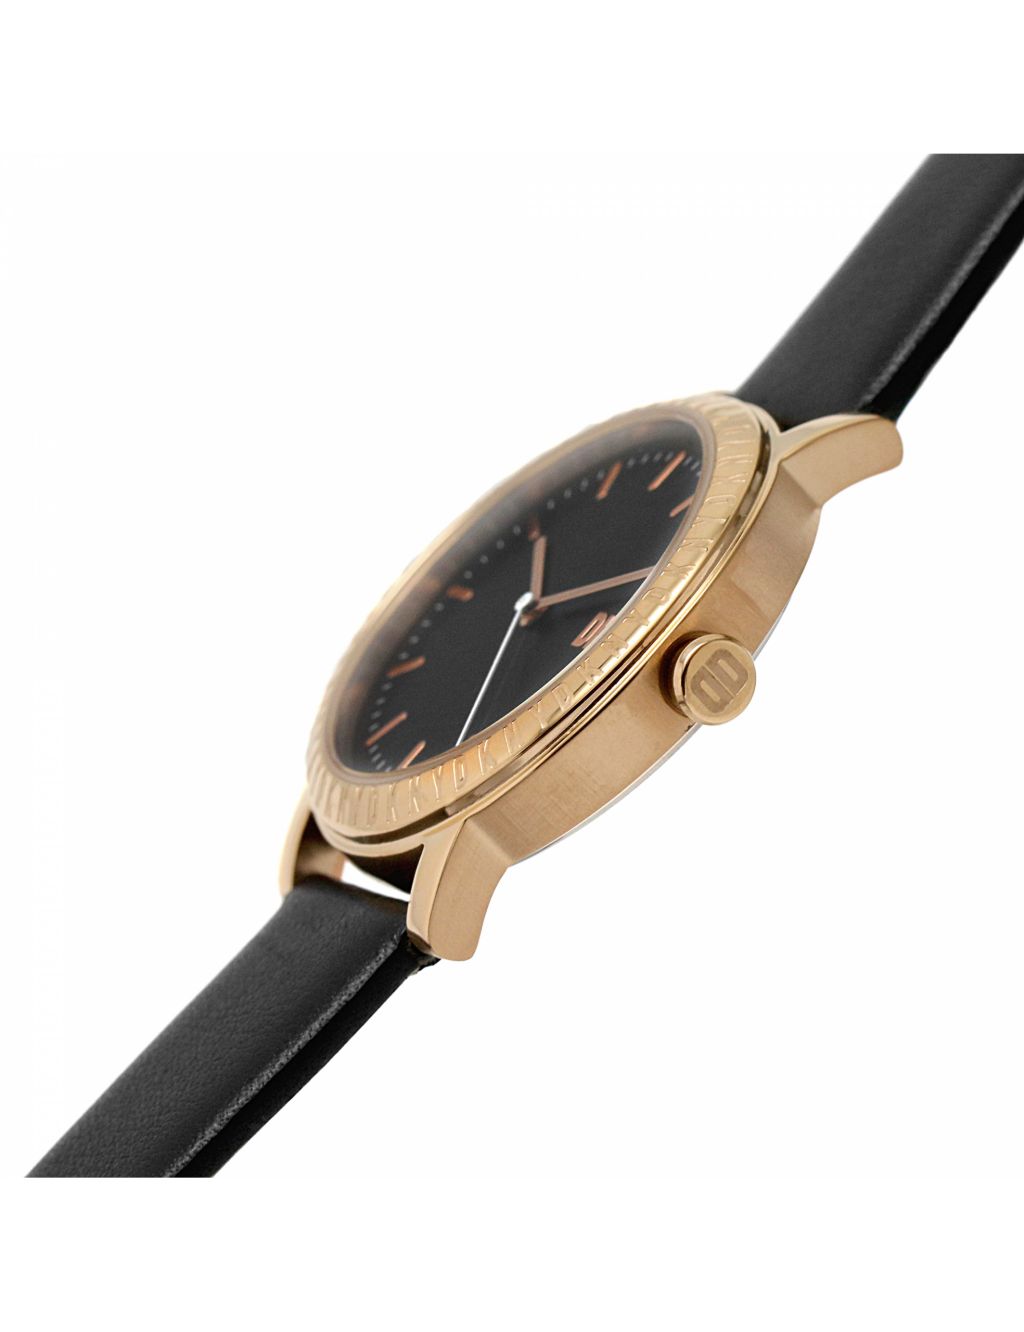 DKNY 7th Avenue Black Leather Watch image 6